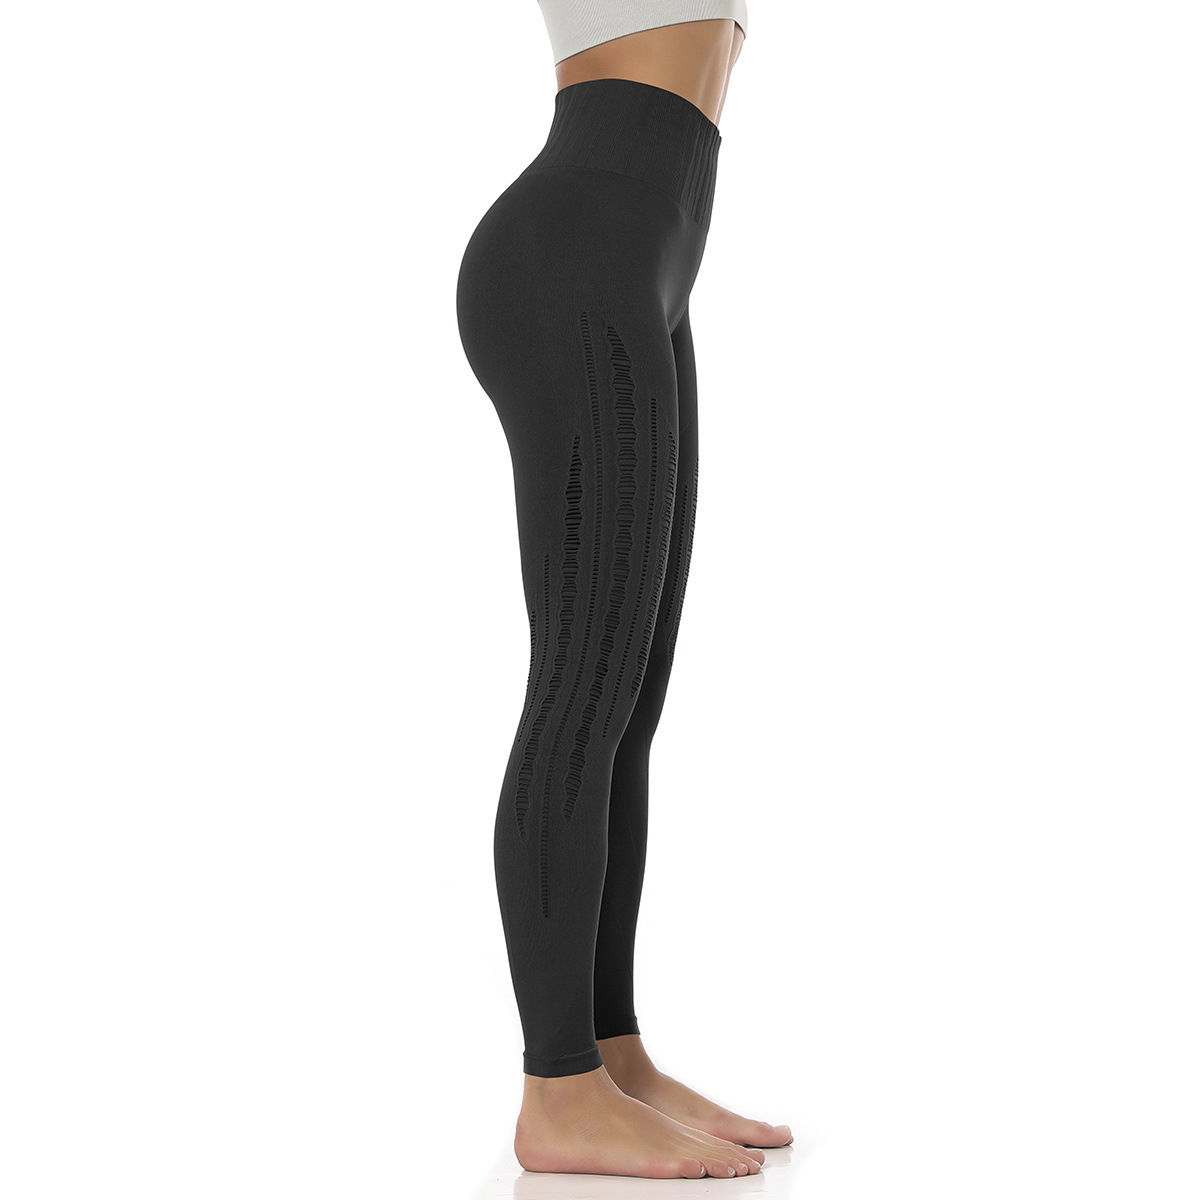 women s breathable quick-drying seamless high waist fitness pants  NSNS11054